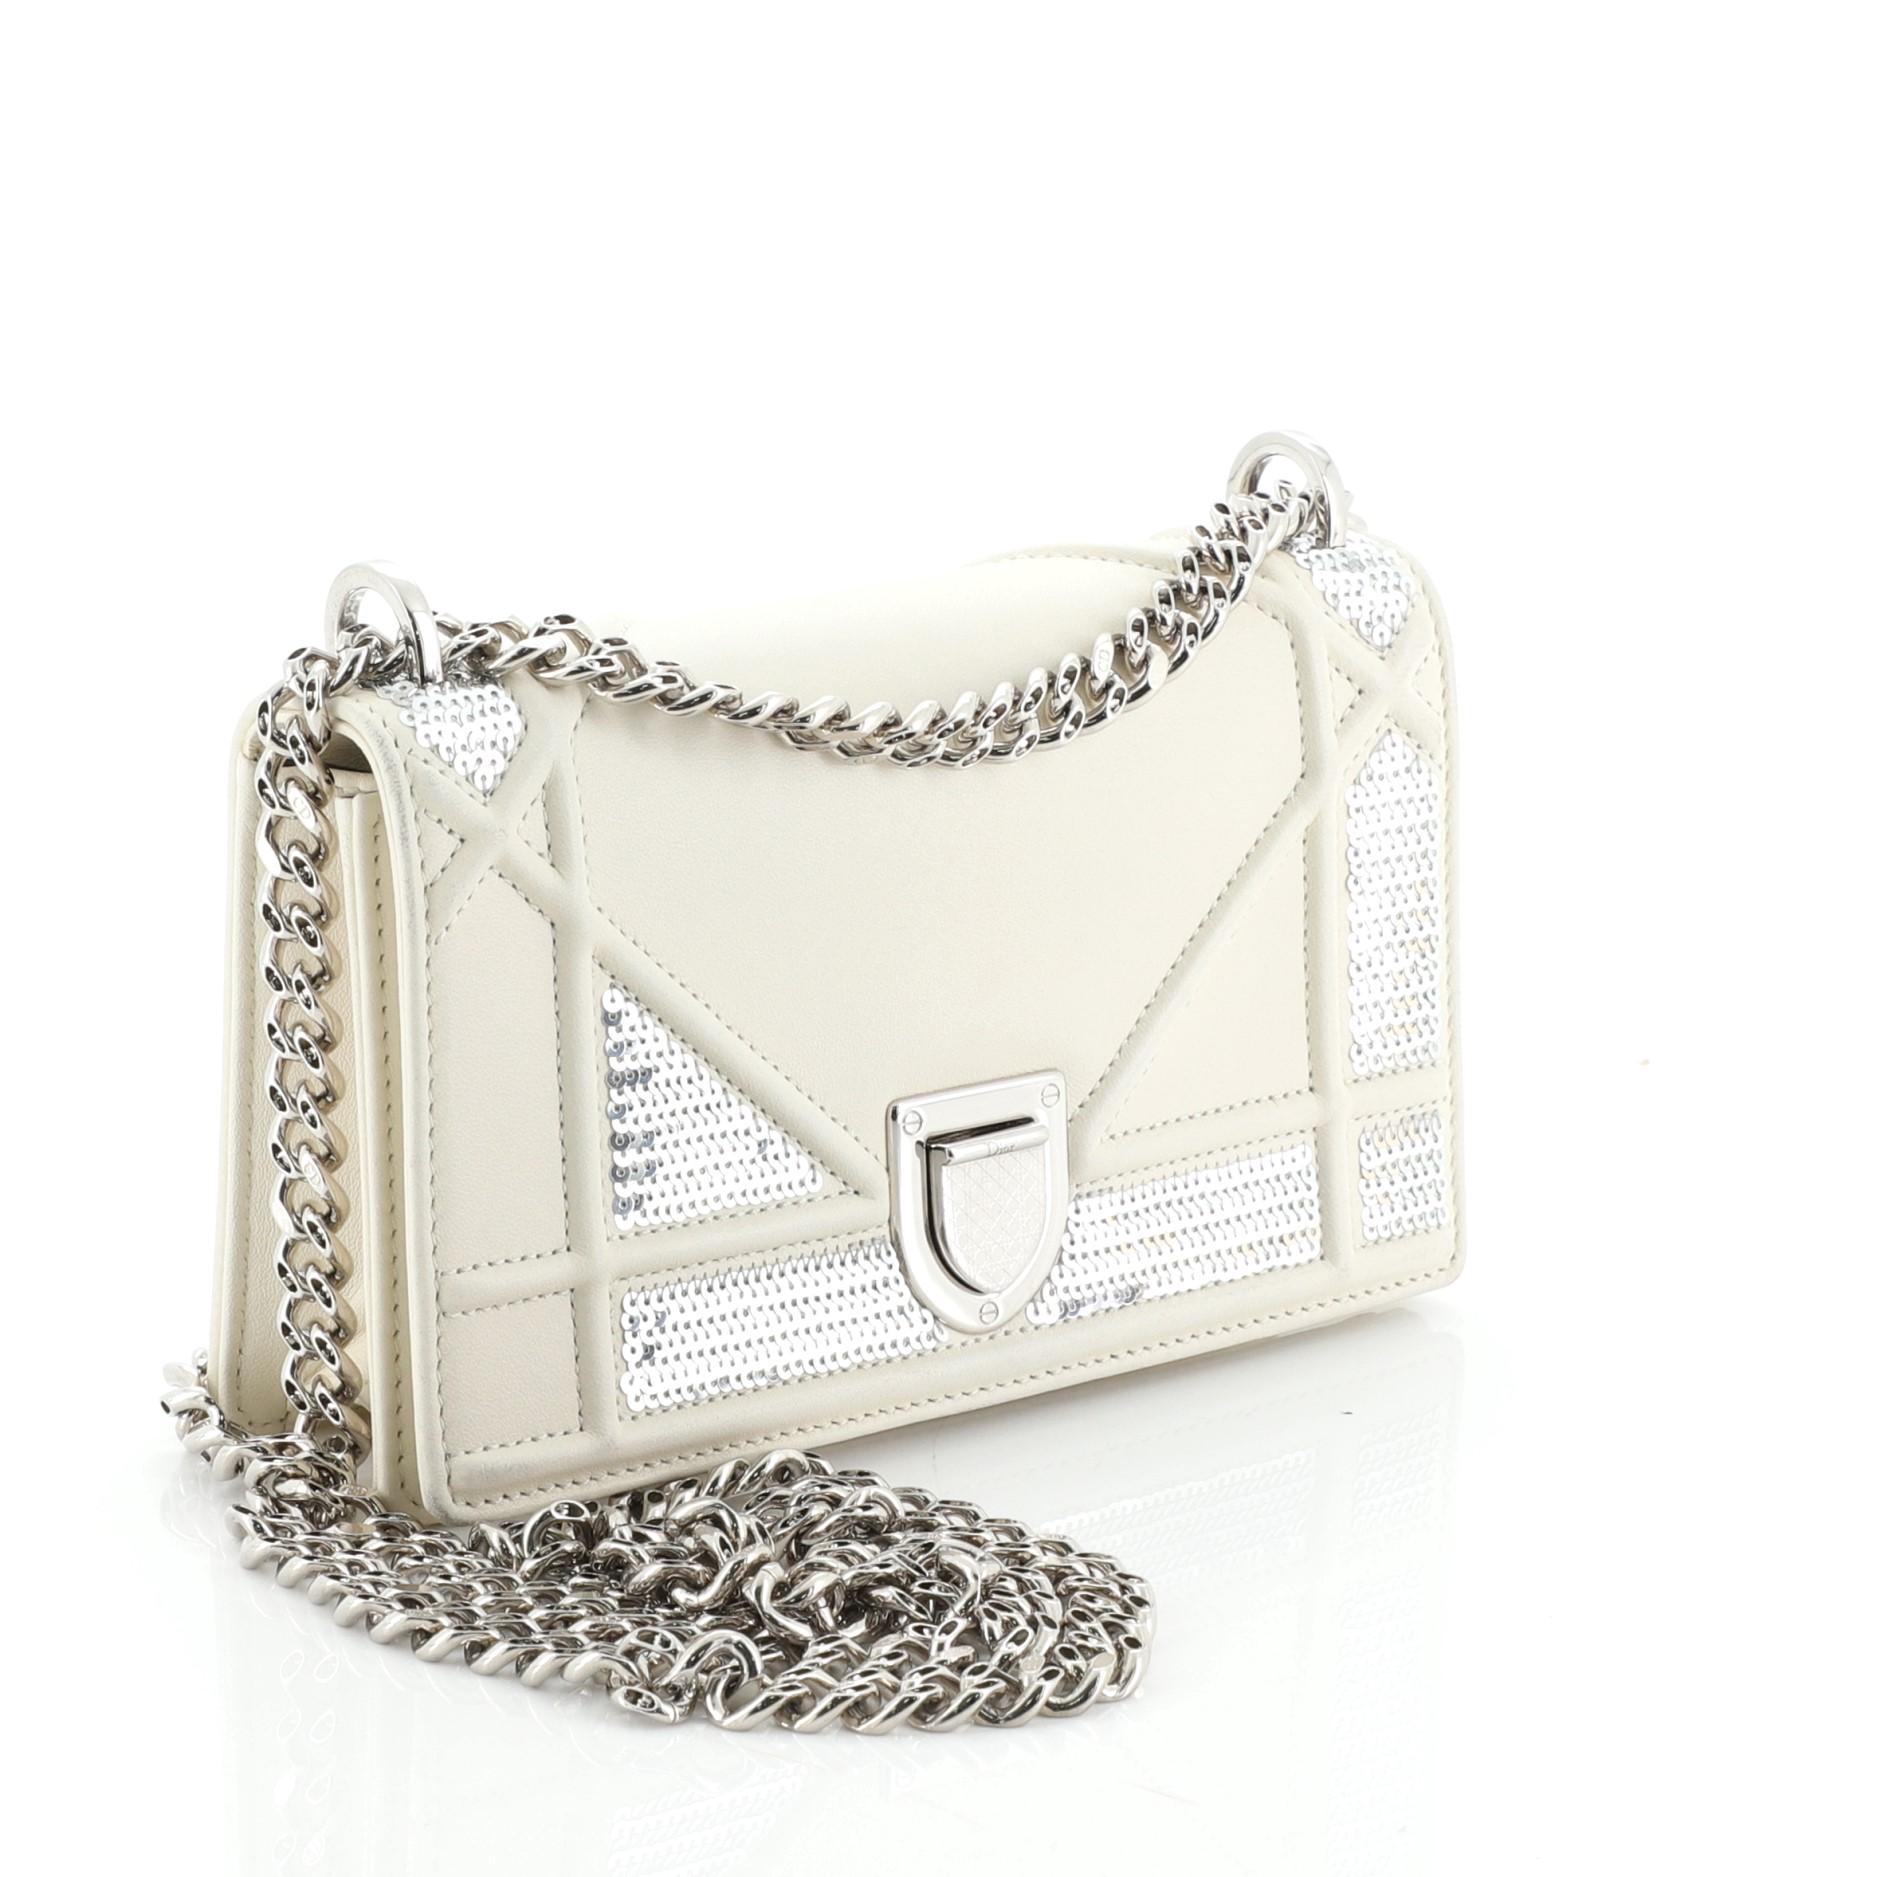 This Christian Dior Diorama Flap Bag Sequin Embellished Lambskin Mini, crafted from white sequin embellished lambskin leather, features embossed and stitched cannage lines, chain link strap, and silver-tone hardware. Its slide-press closure opens to